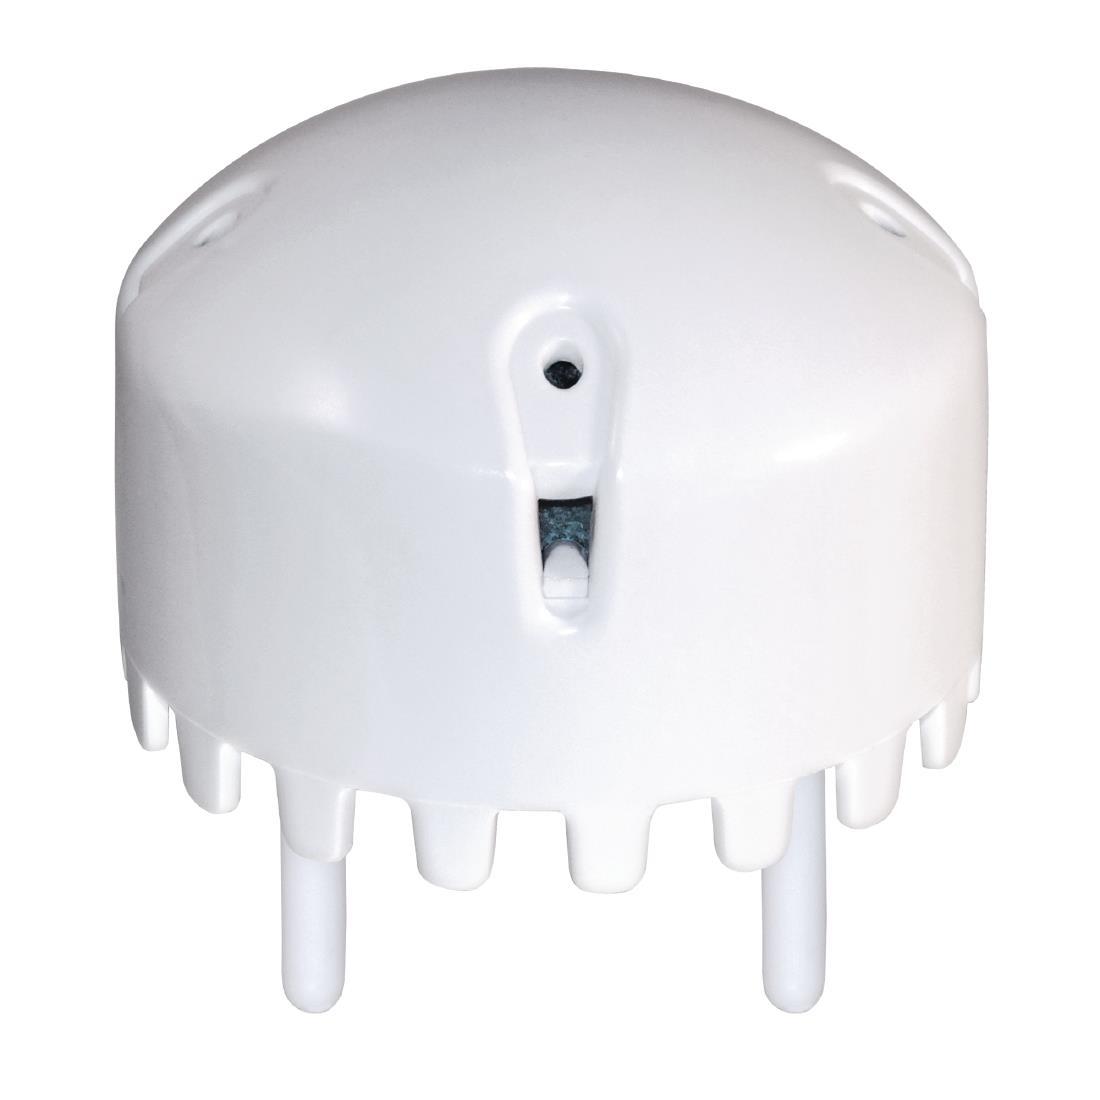 Eco Cap Type 1 Two-Prong Urinal Caps (4 Pack) - DC217  - 2